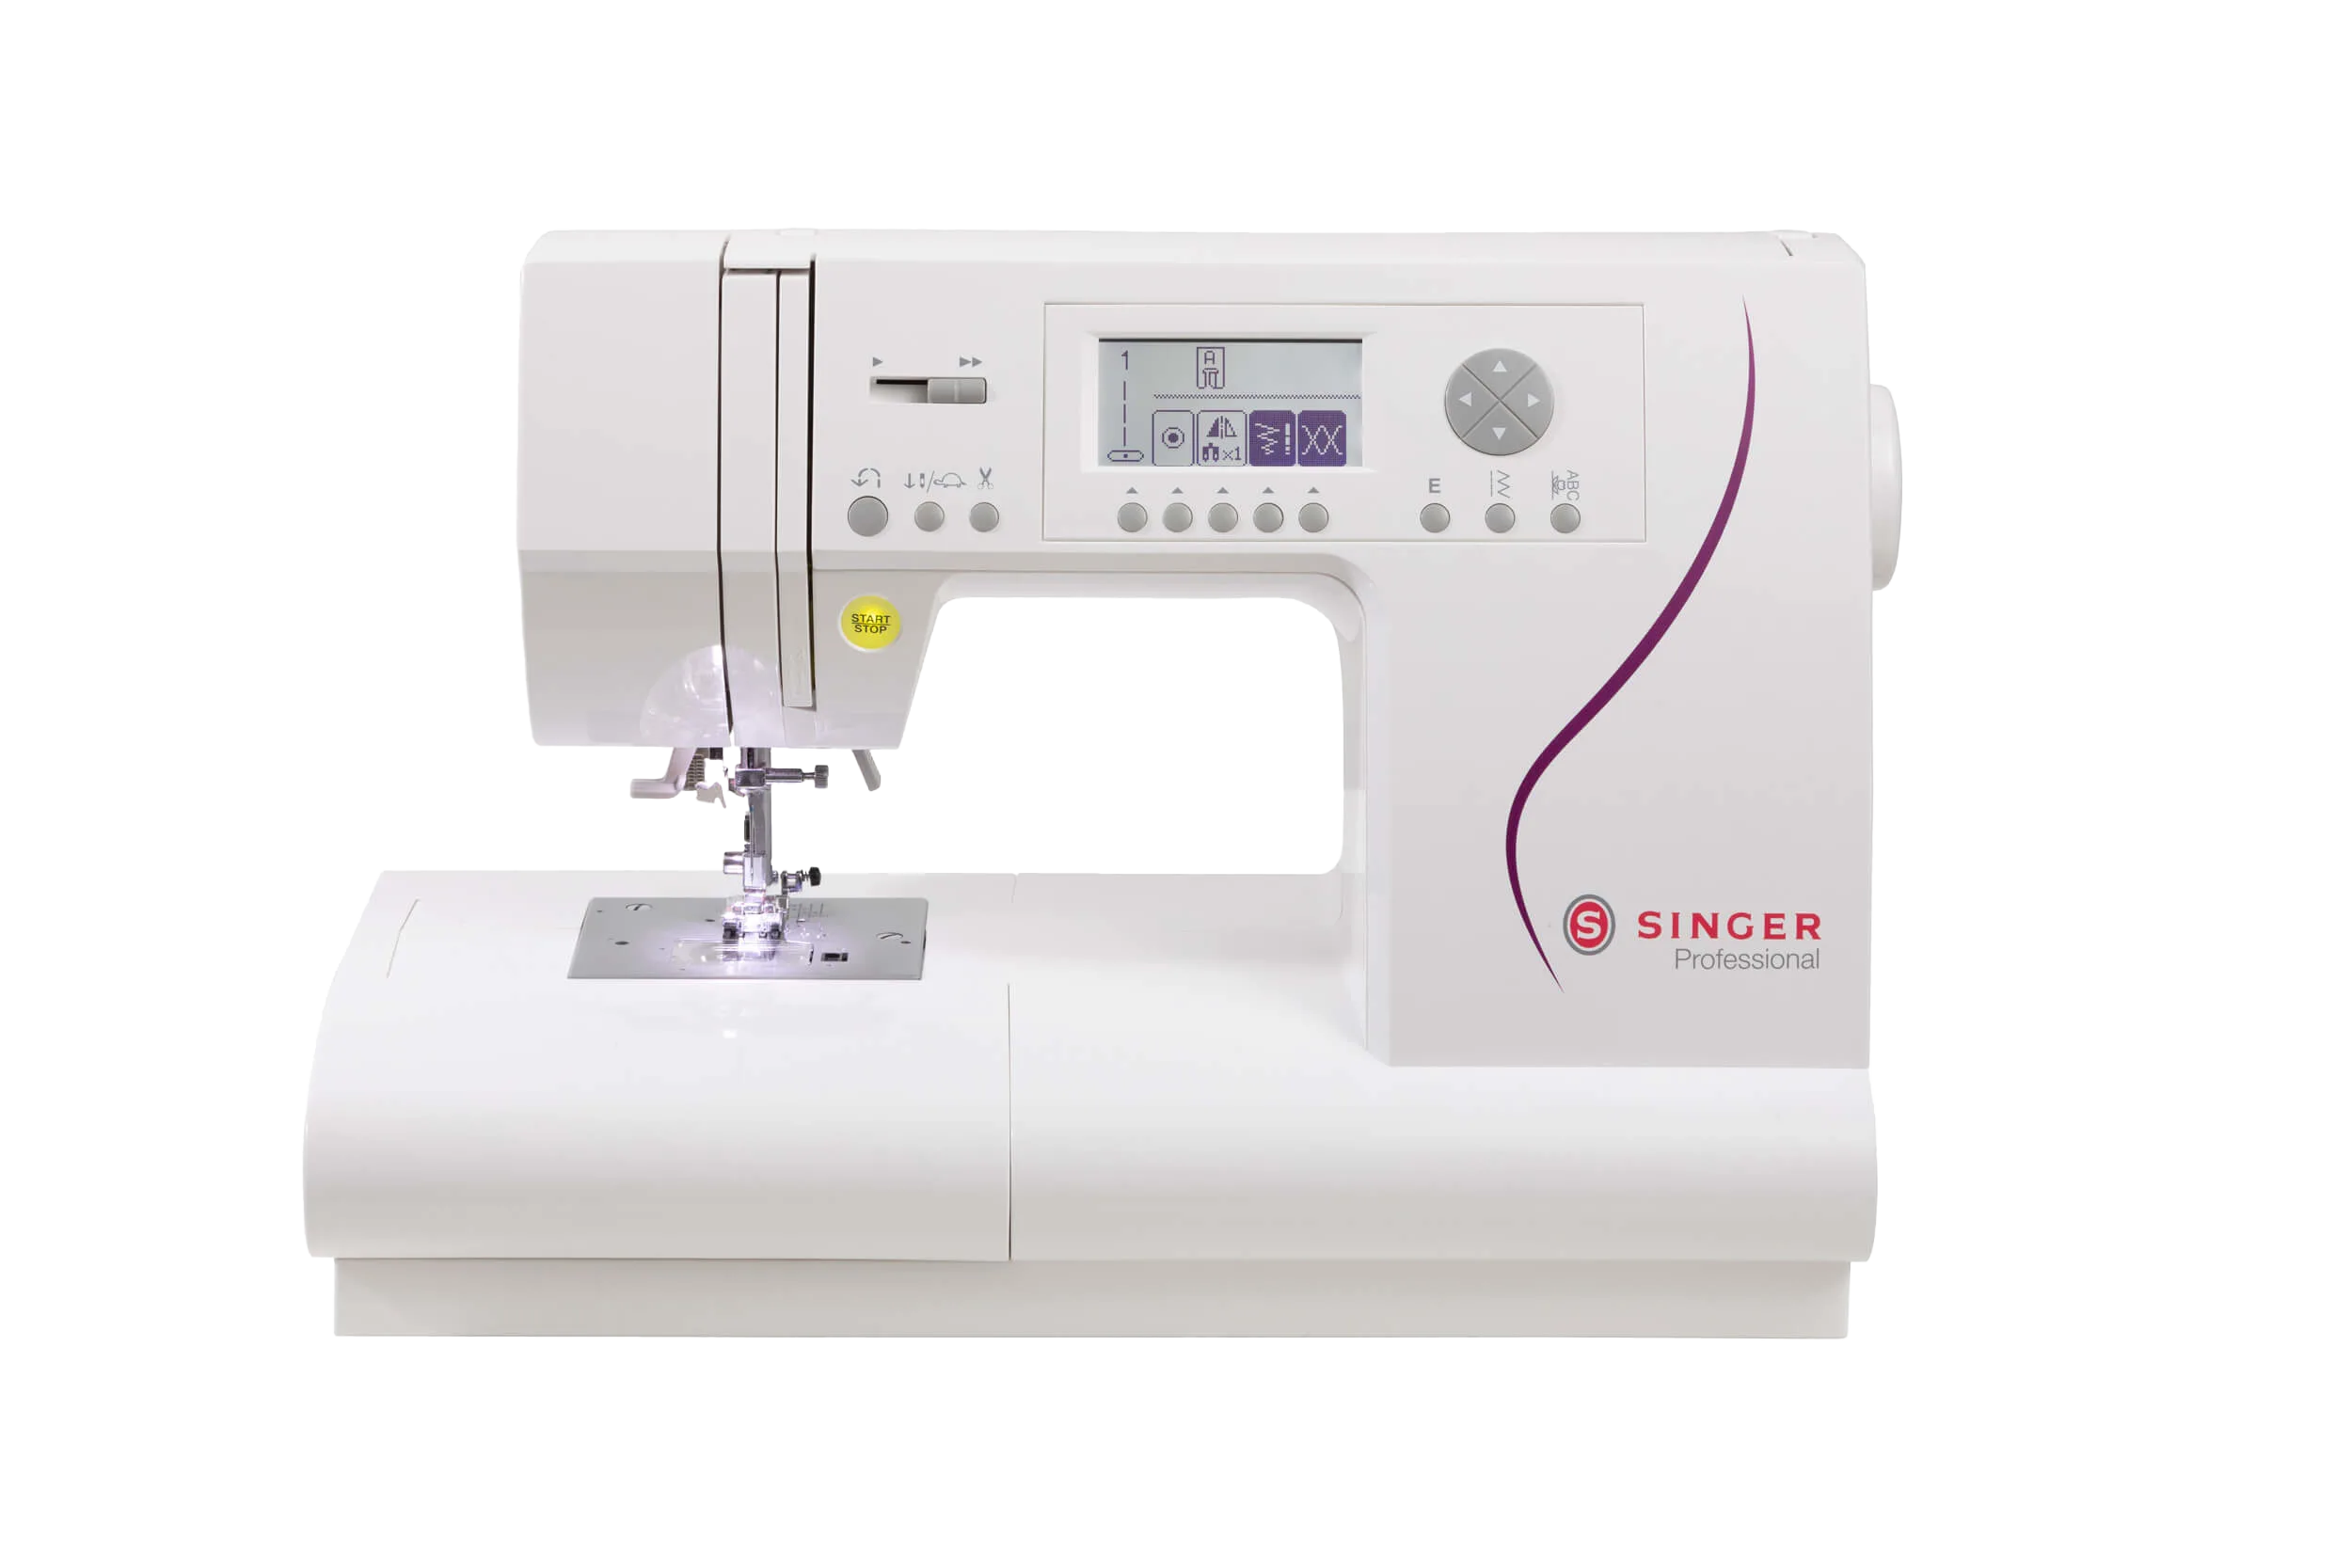 Singer C430 Professional Sewing Machine for Sale at World Weidner